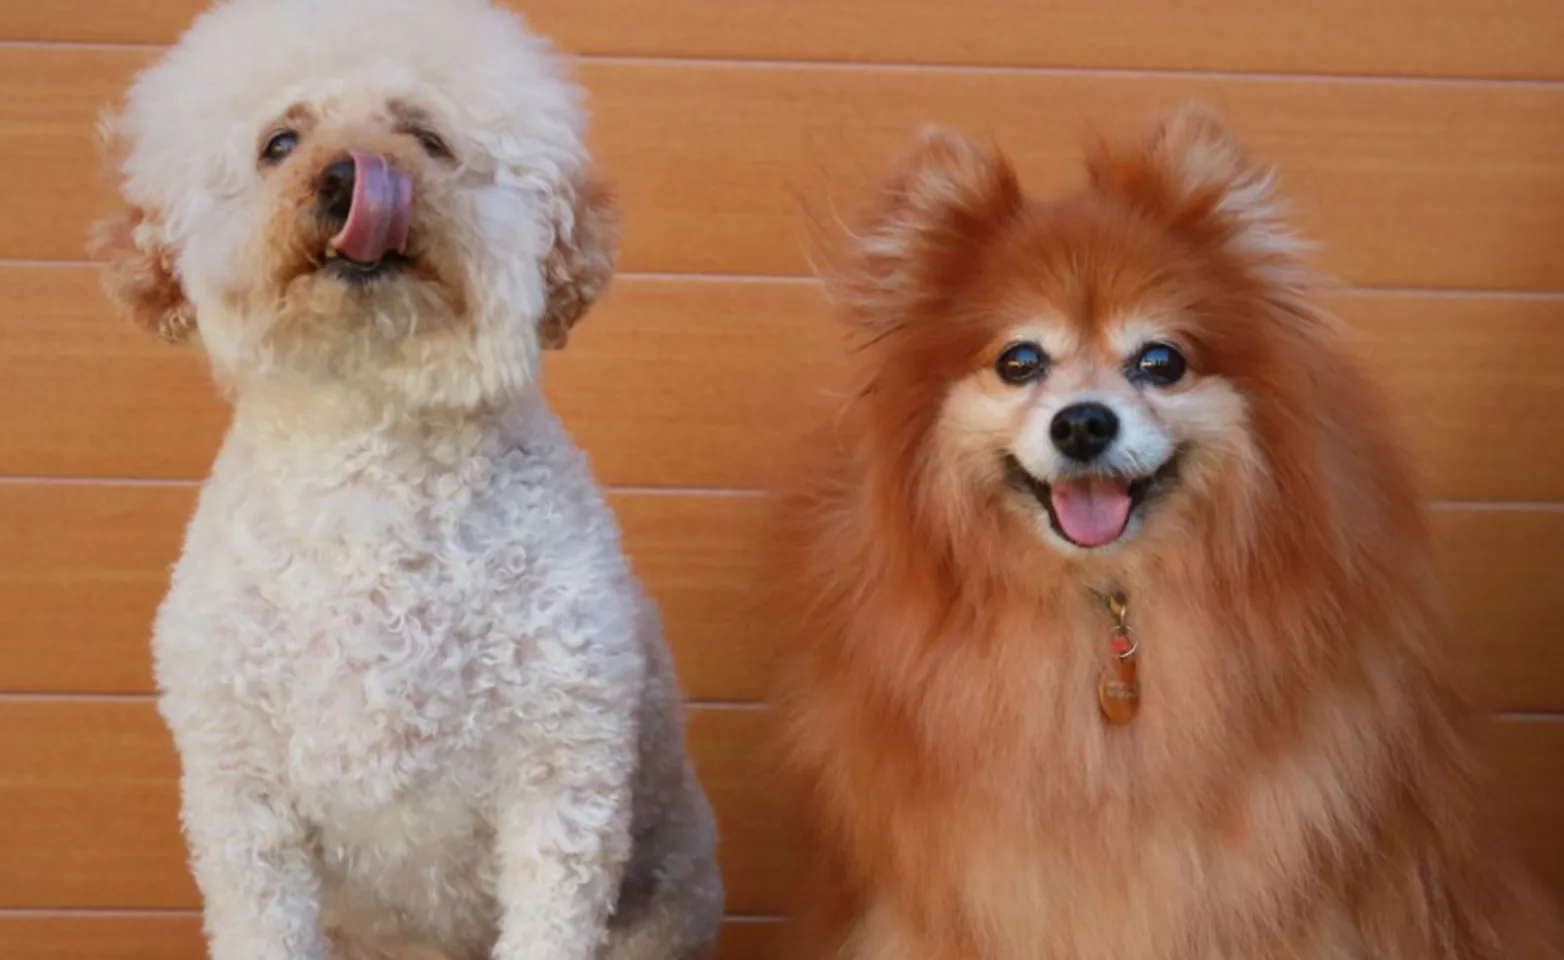 A small white dog and brown dog sitting next to each other